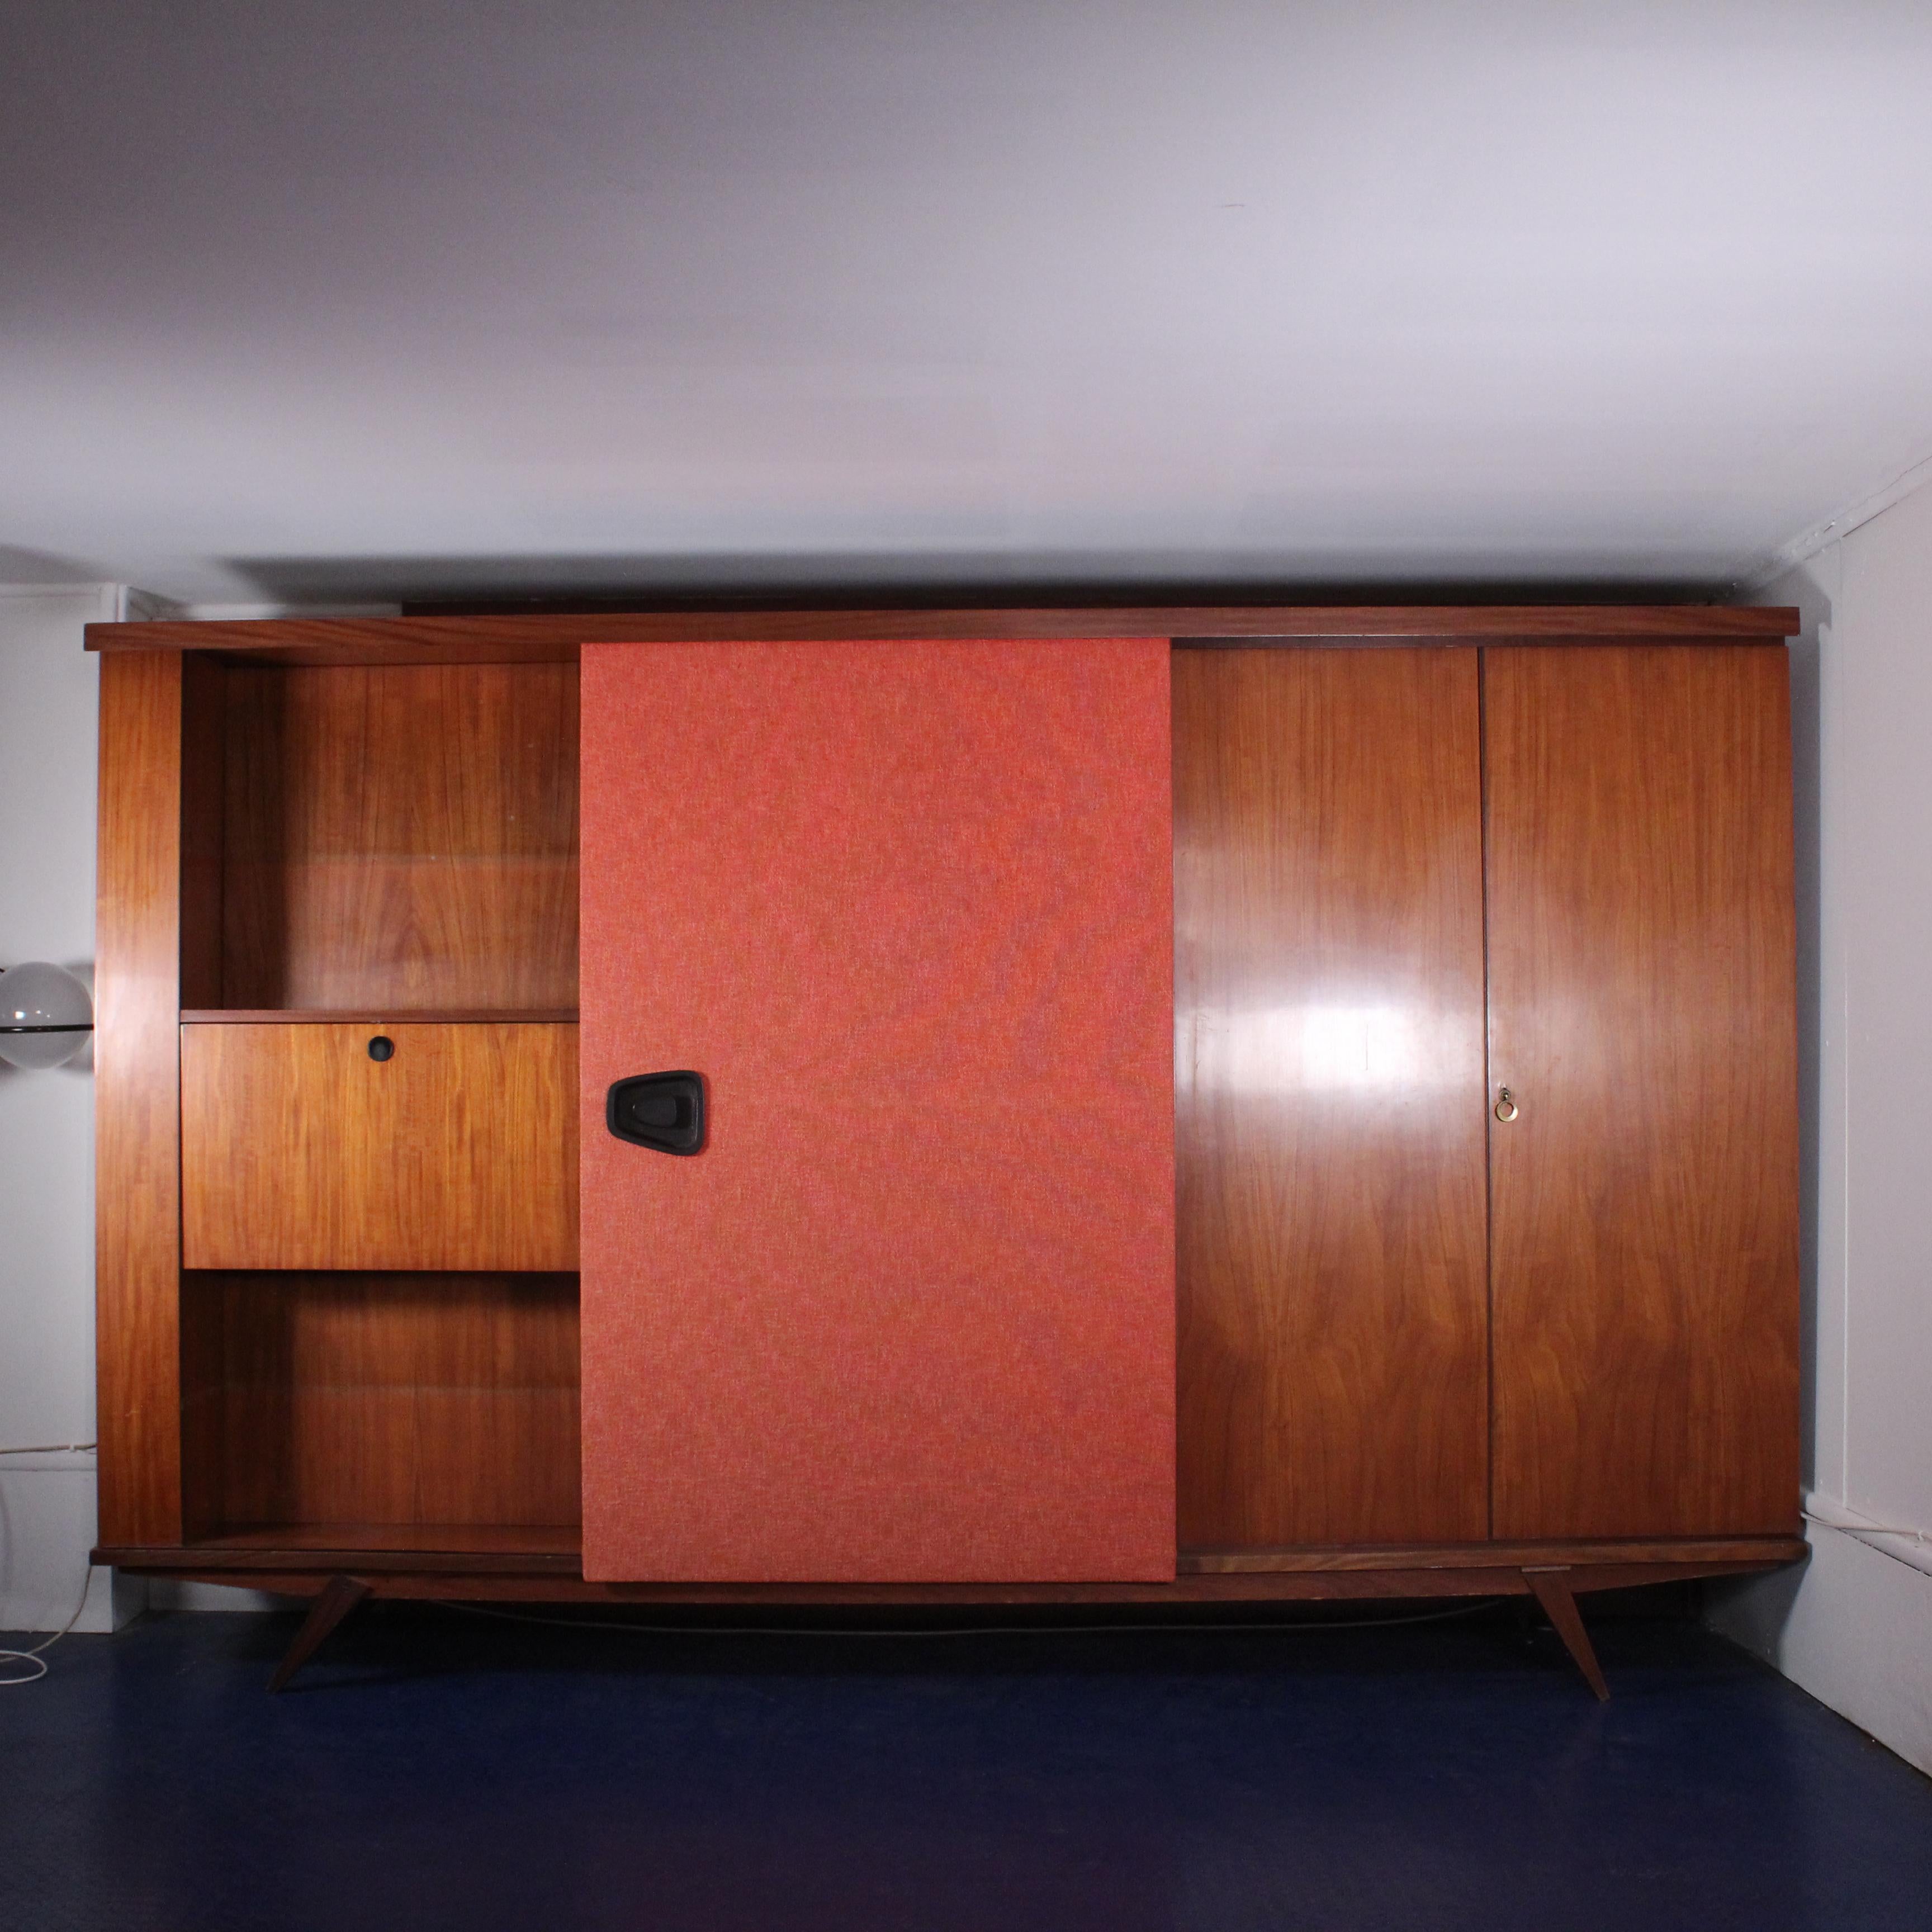 The Gio Ponti Wardrobe from the 1960s epitomizes mid-century modern sophistication and functional artistry. Crafted under the visionary eye of Italian architect and designer Gio Ponti, this iconic piece seamlessly blends form and function. The